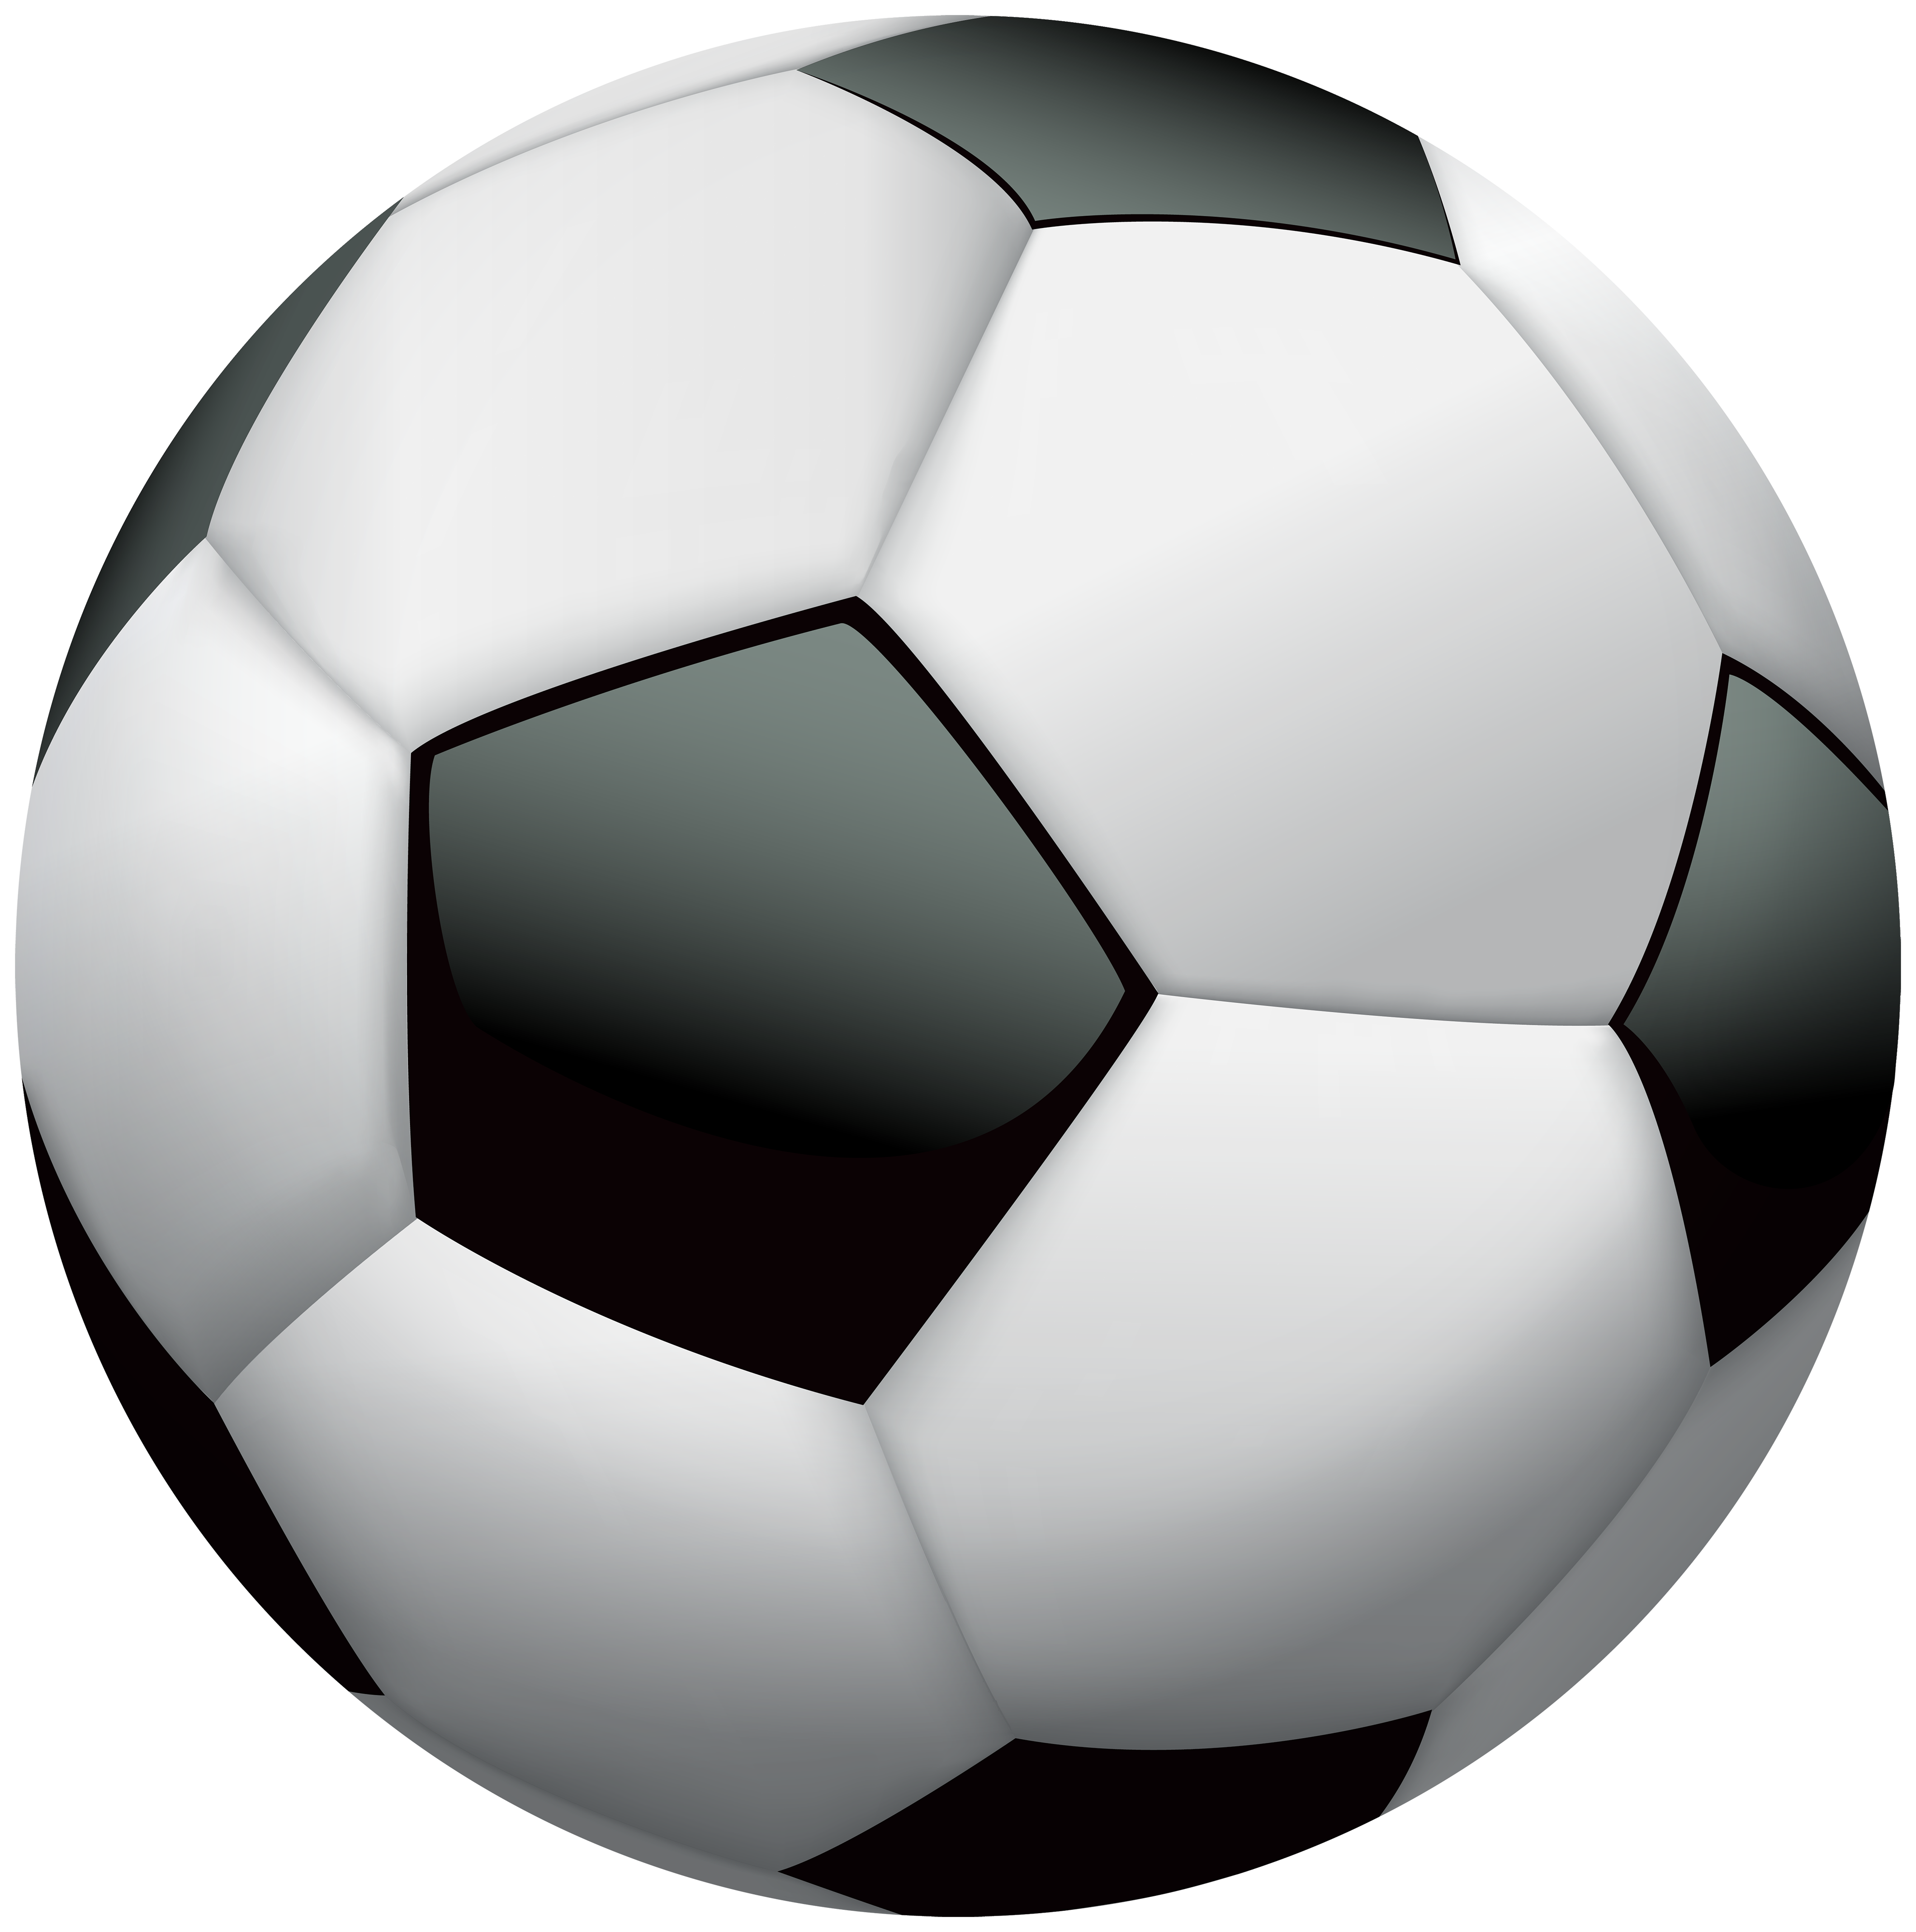 Soccer ball soccer clip art pictures image clipartix - Cliparting.com